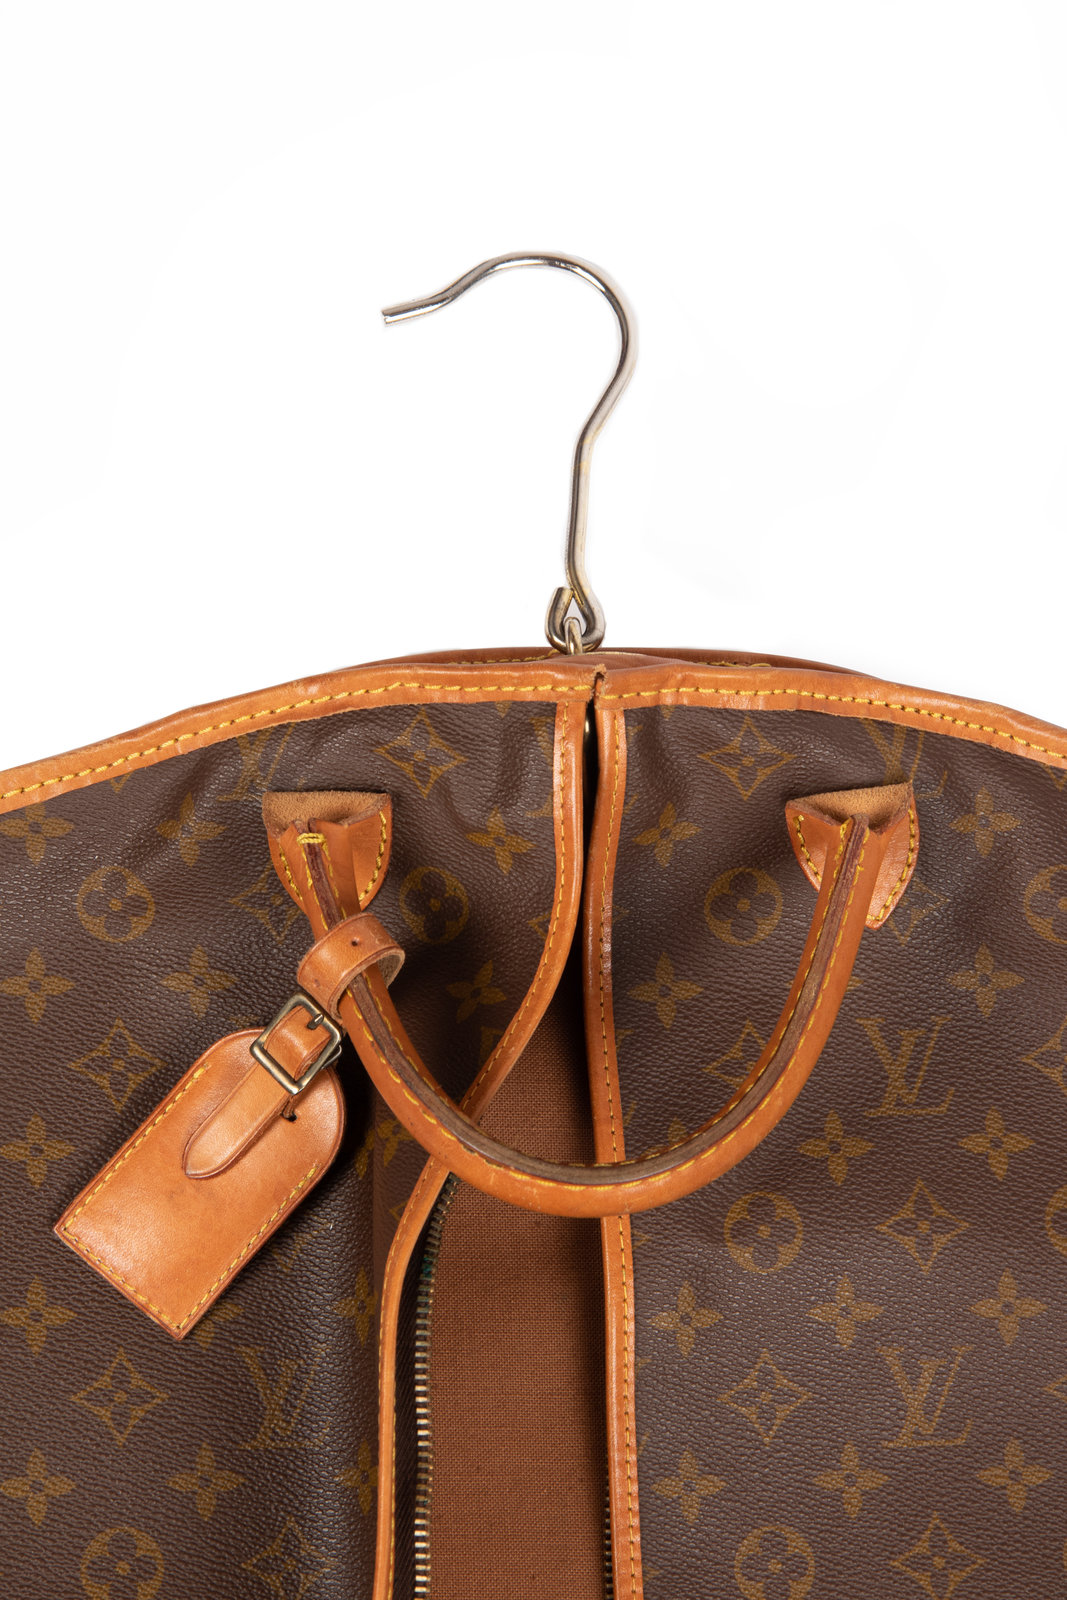 Three Pieces Of Reproduction Louis Vuitton Luggage 20th